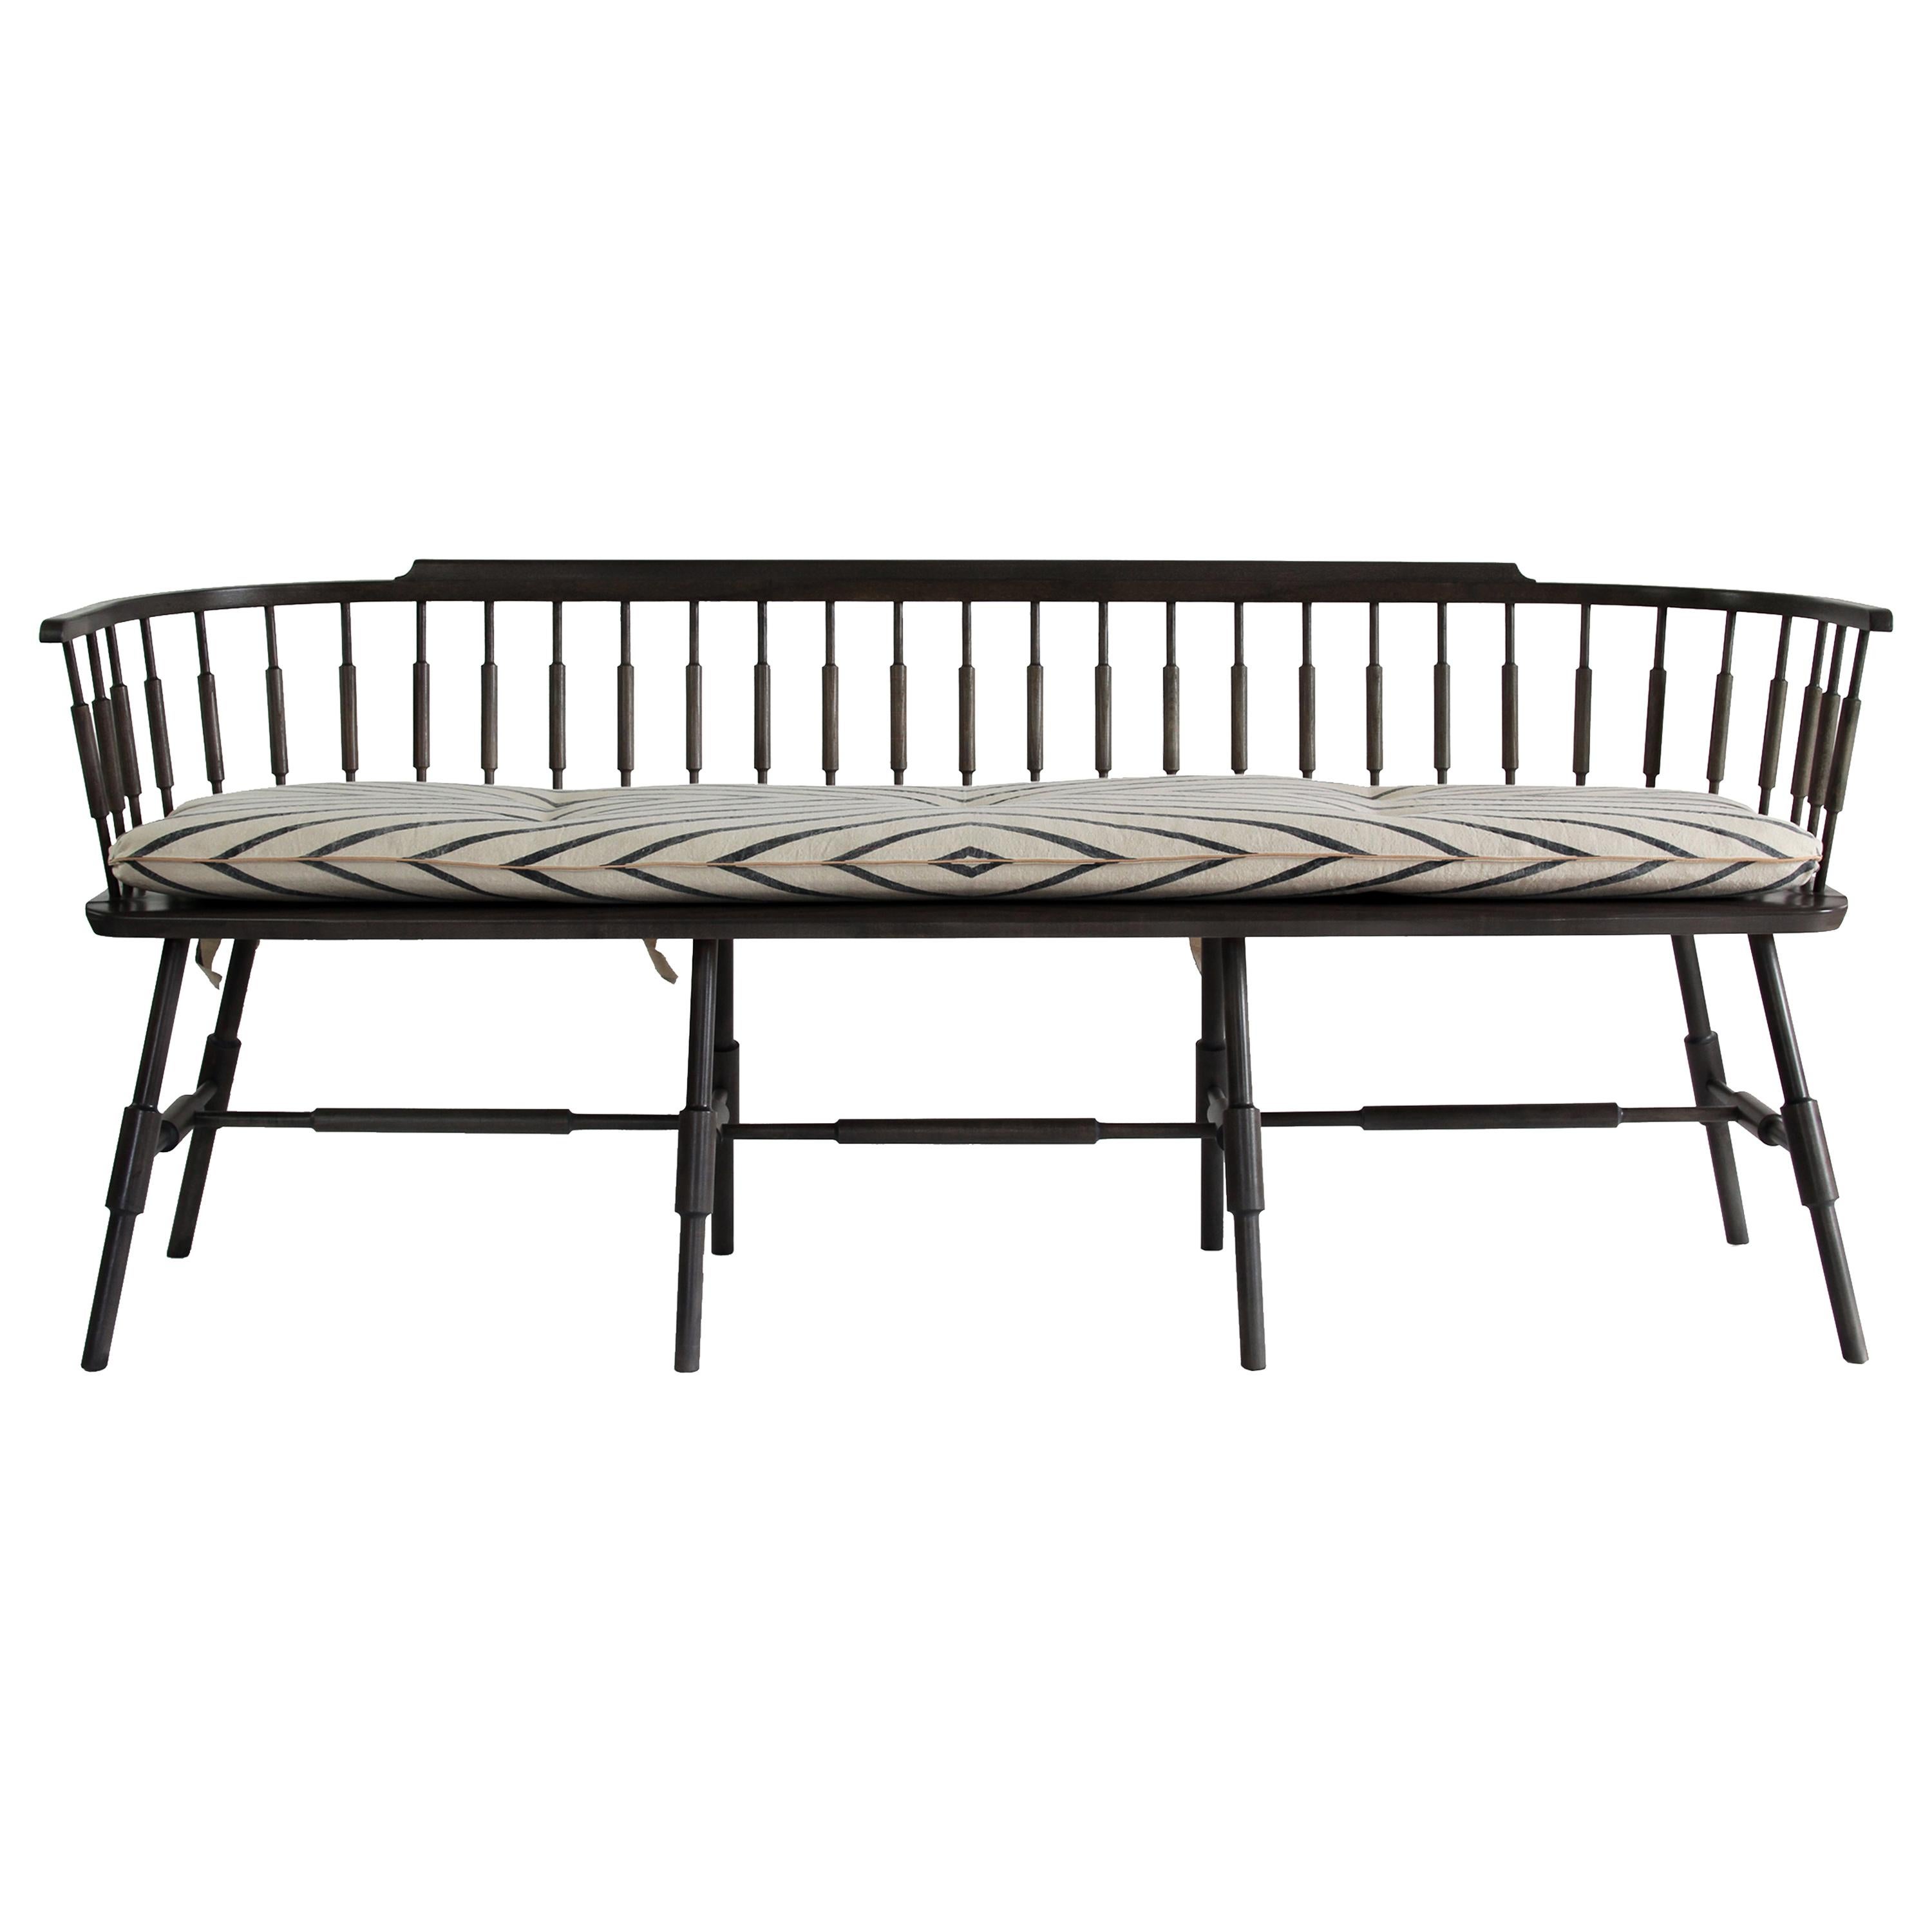 72" Atlantic Settee, Contemporary Windsor Settee in Ebony Stain on Ash Wood For Sale